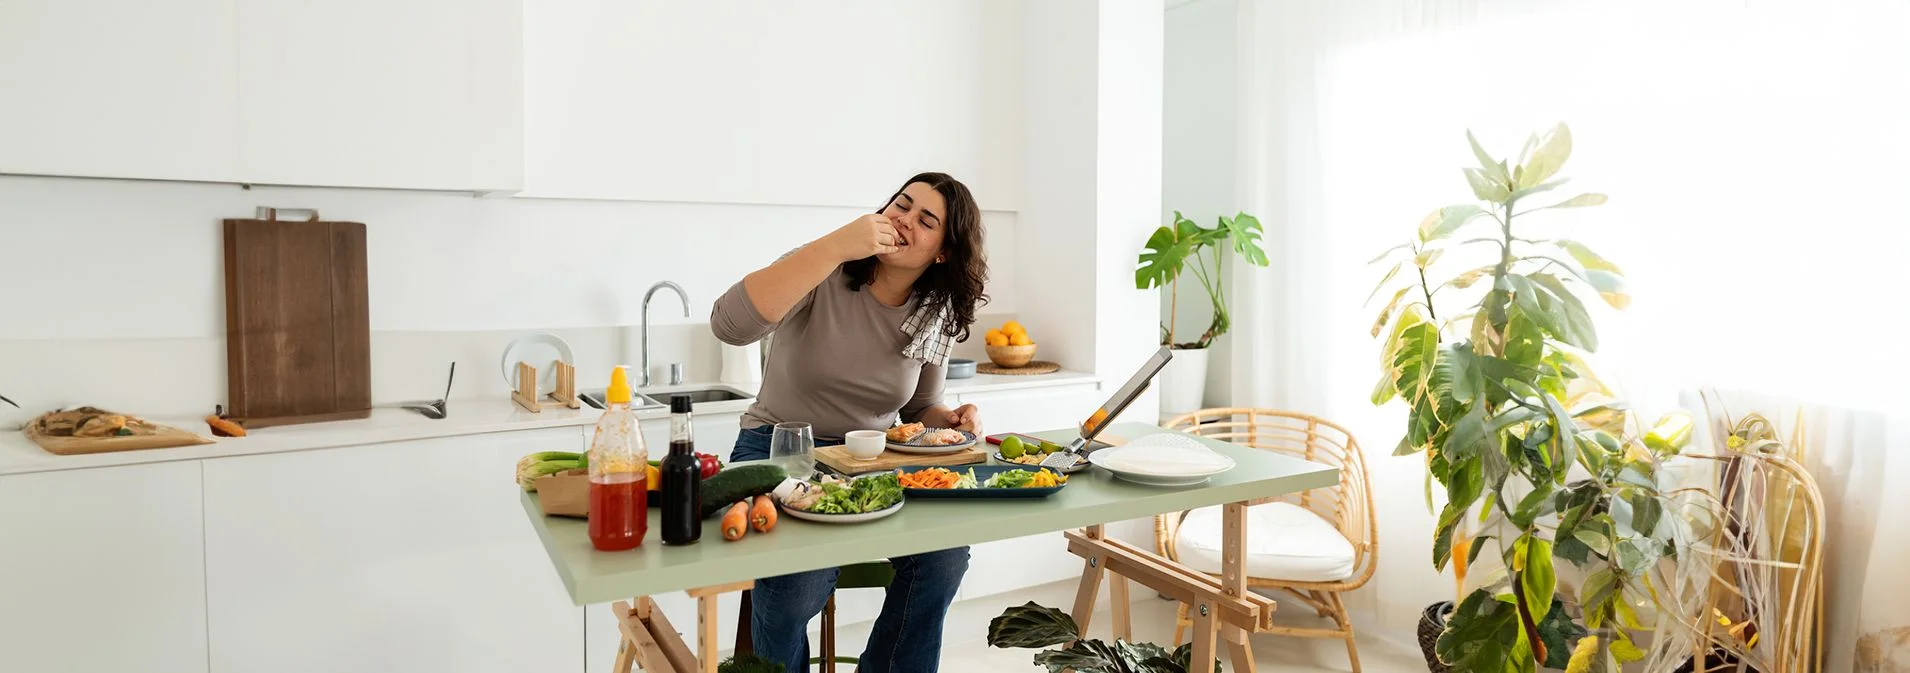 A woman sitting at a table in a kitchen eating fresh veggies 